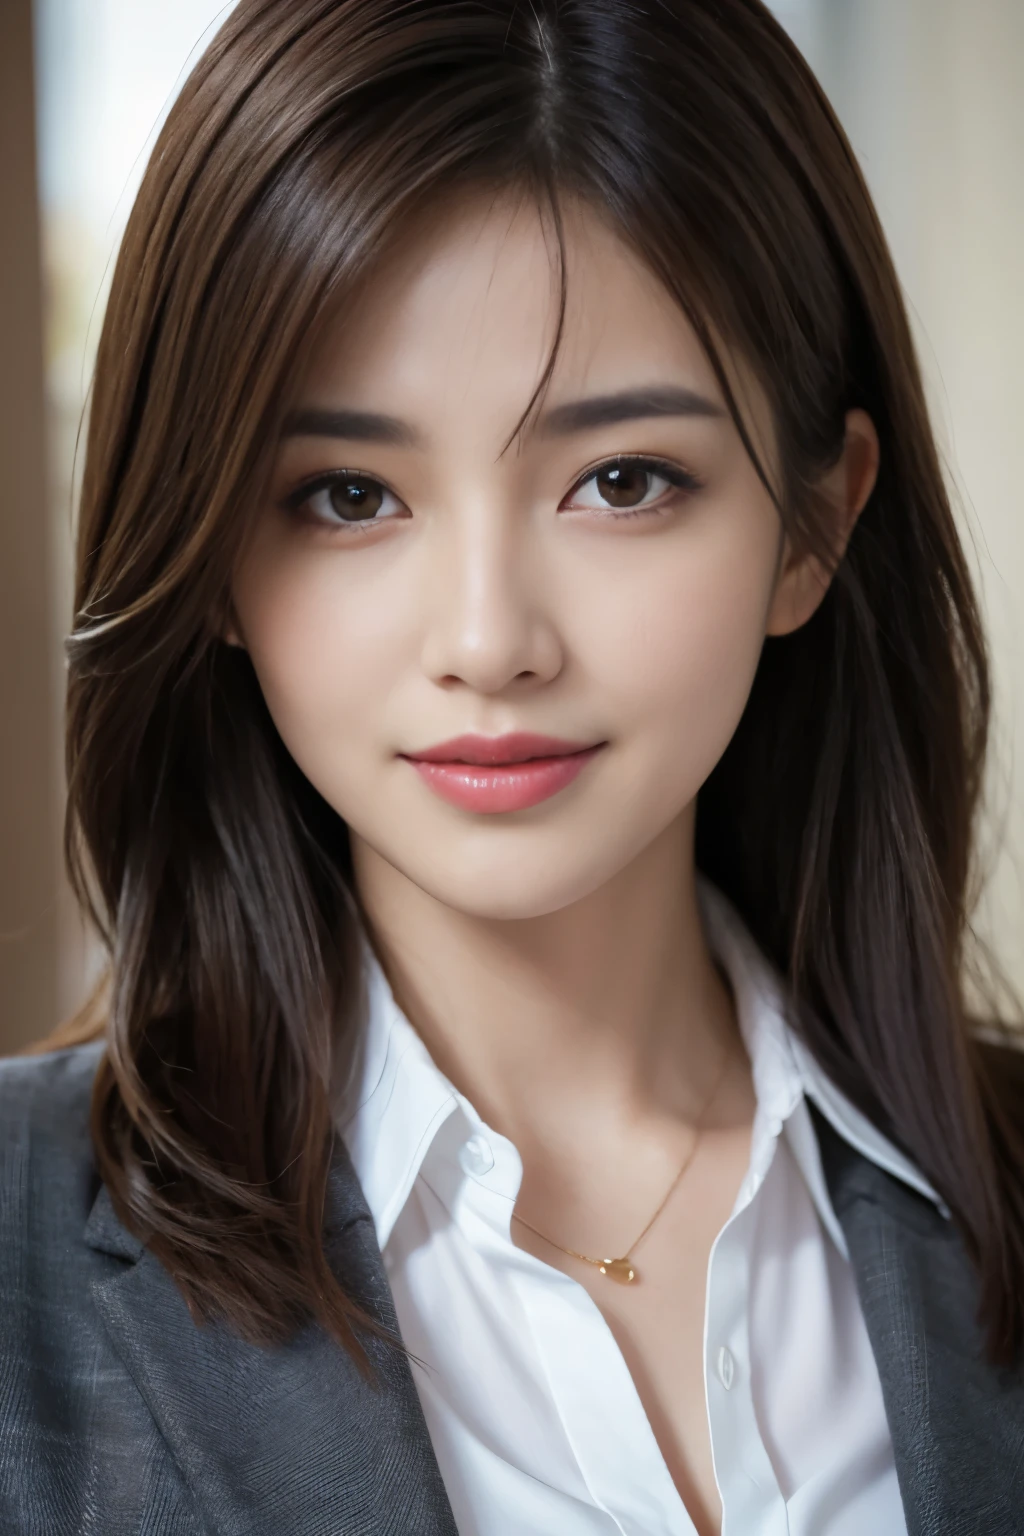 table top、highest quality、real、Super detailed、finely、High resolution、8k wallpaper、one beautiful woman、、、light brown disheveled hair、wearing a business suit、sharp focus、perfect dynamic composition、beautiful detailed eyes、thin hair、Detailed and realistic skin texture、smile、close up portrait、model body shape